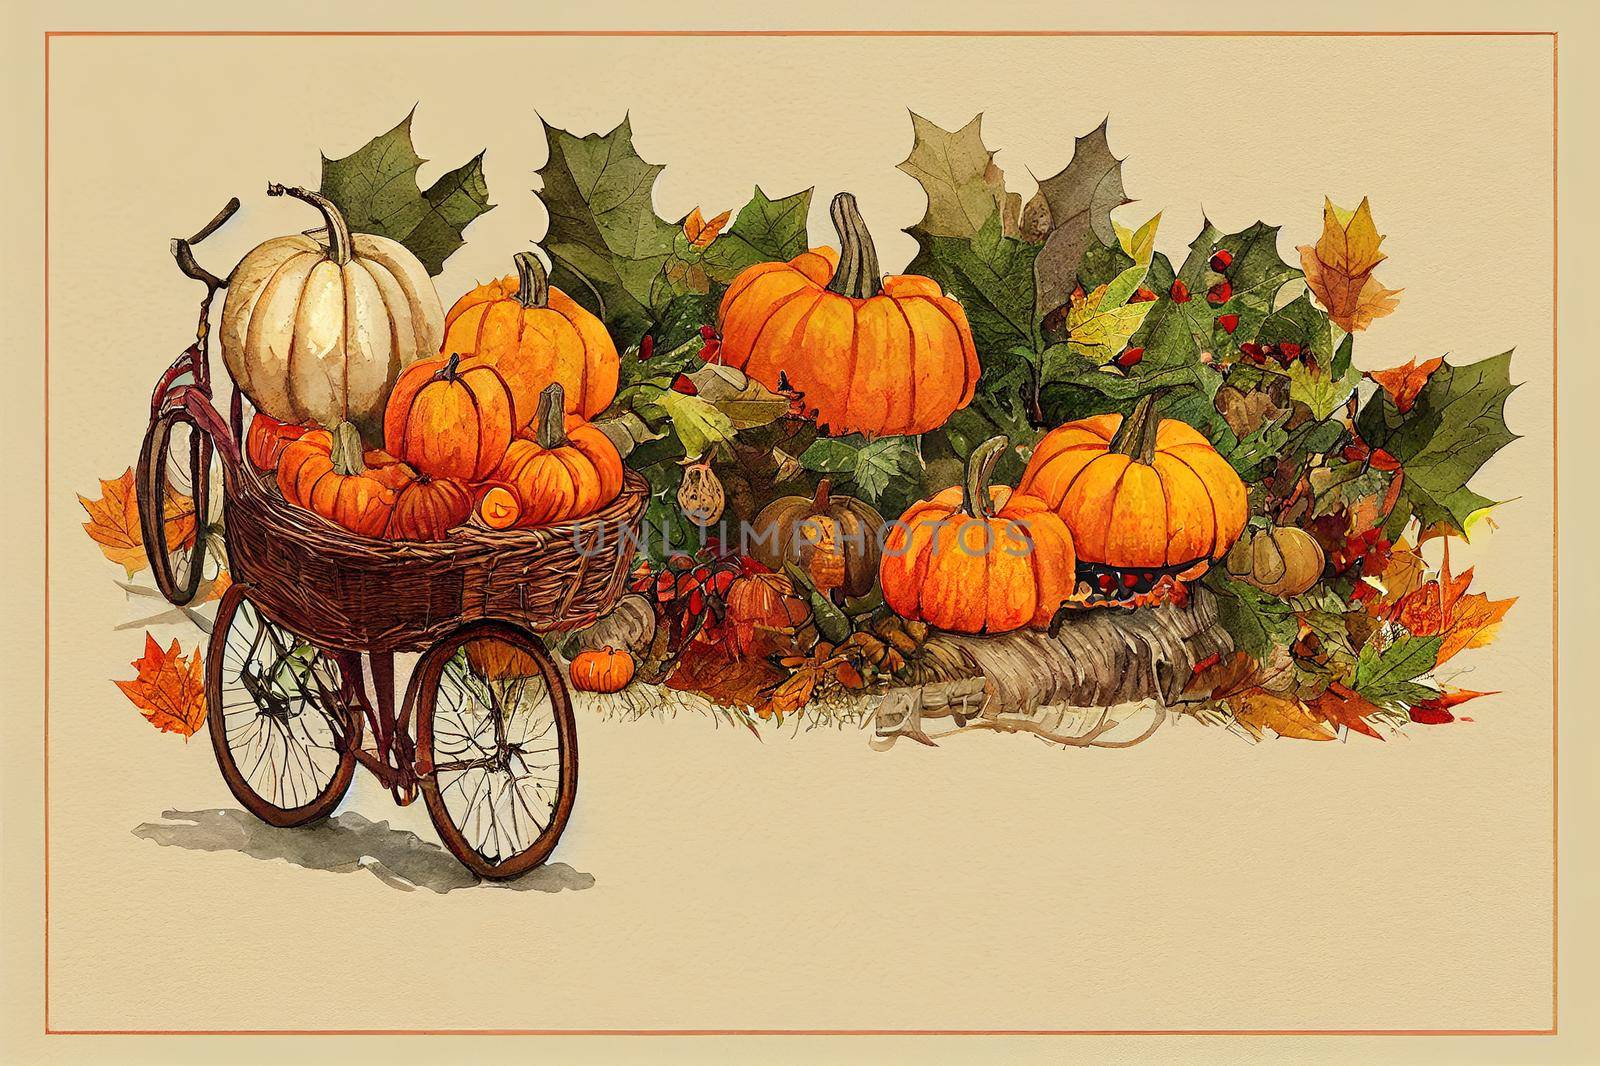 Autumn card with bicycle, wickers baskets, pumpkins, apples, robin by 2ragon